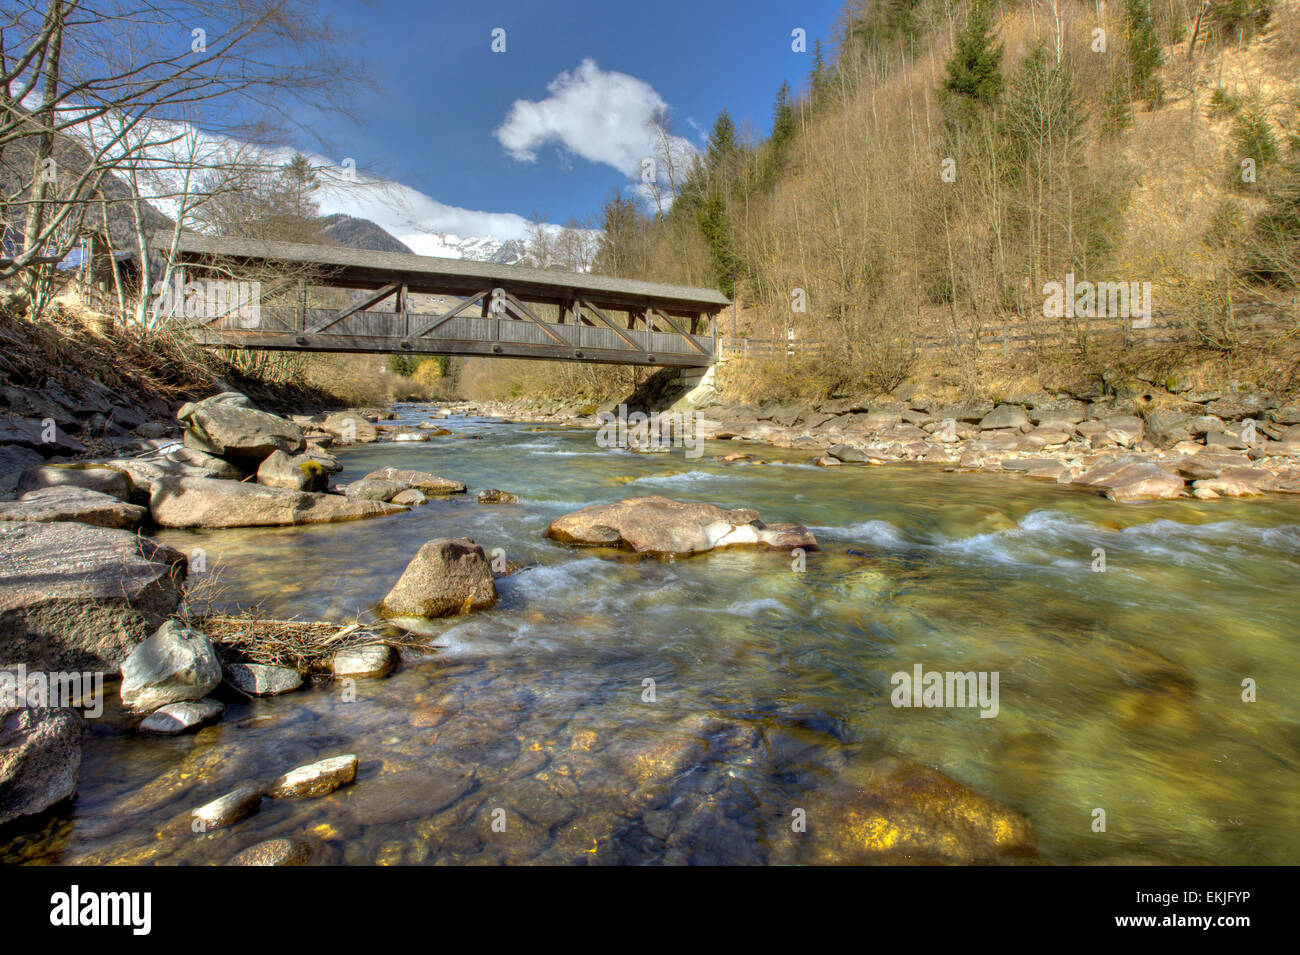 Luttach - The Wooden Bridge of Lutago Ahrntal in South Tyrol on the river Ahr with the Dolomites (Italian: Dolomiti) in background Stock Photo